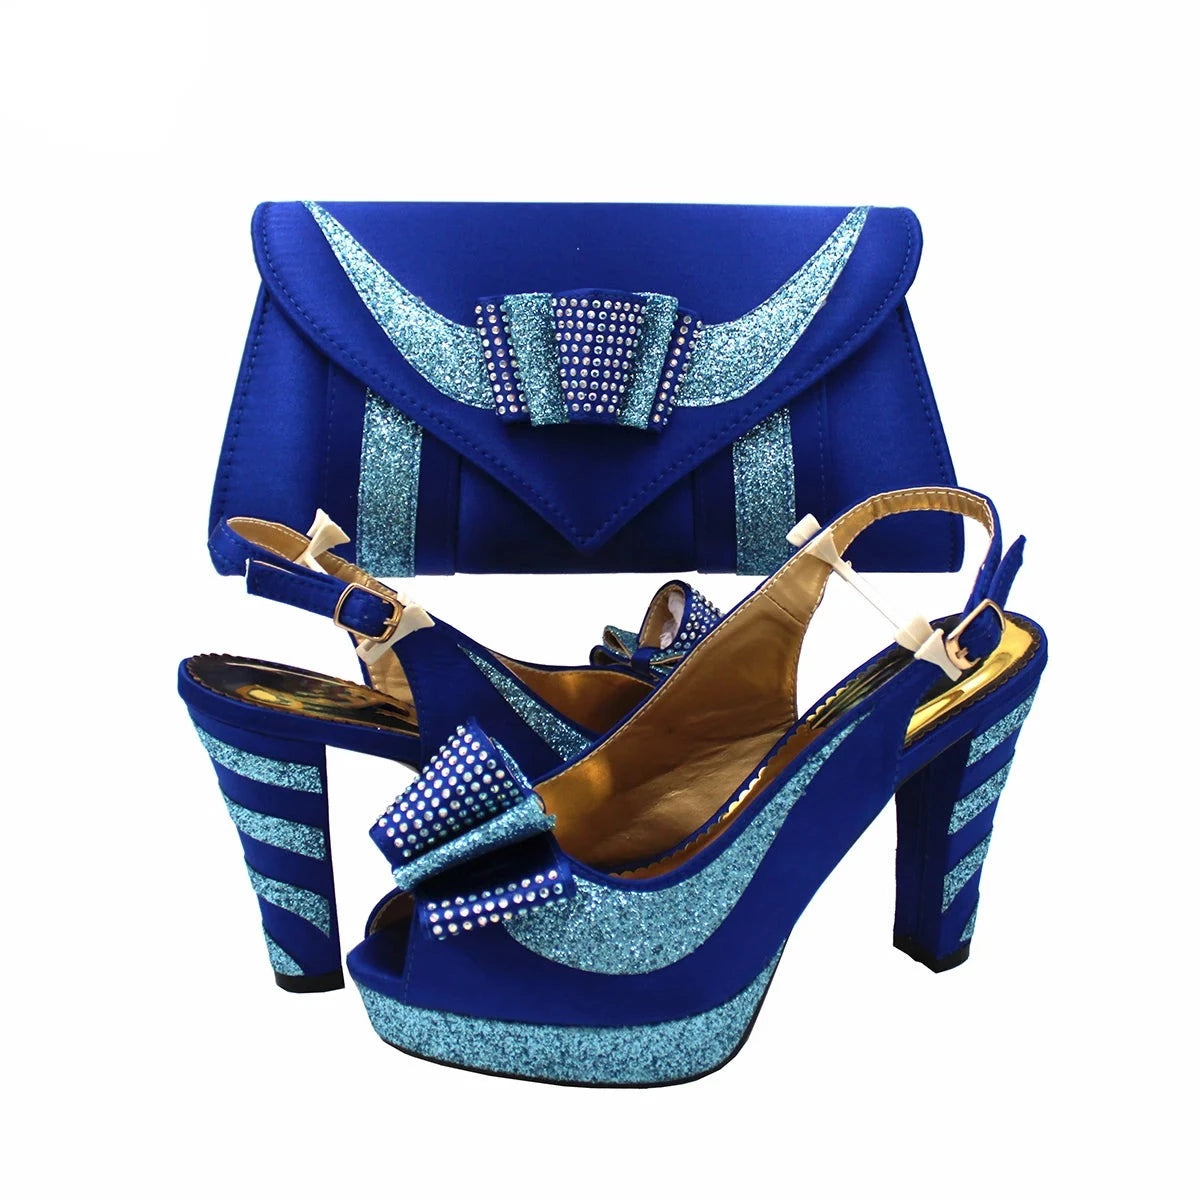 Indulge in luxury with our Elegant Royal Blue Women's Shoe Set. Gracefully designed with stylish Royal Blue Heels, this set of Ladies' Blue Dress Shoes is perfect for any formal or evening occasion. Elevate your fashion game with the sophisticated and chic Blue Shoe Collection.